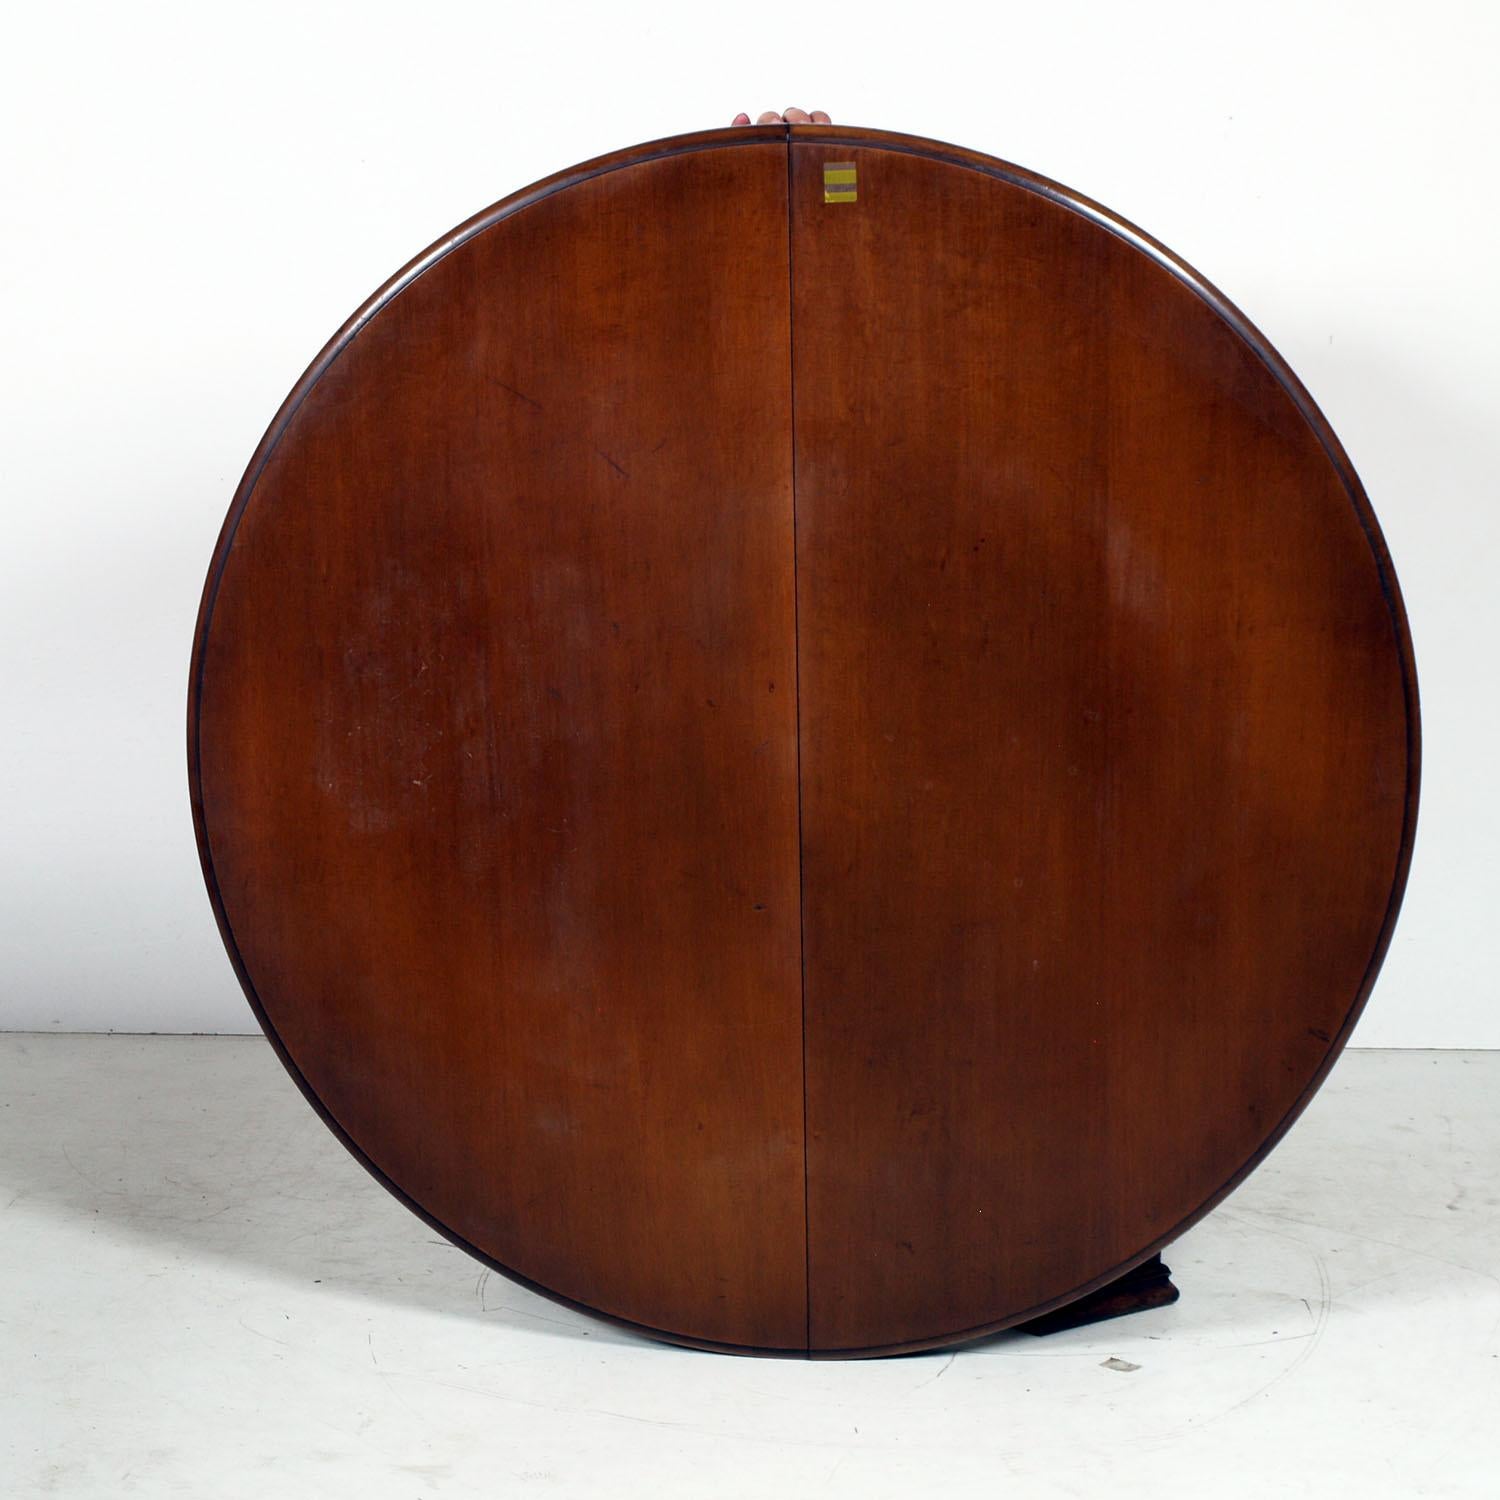 European 1940s Italy Tuscany Renaissance Extendable Round Table by Michele Bonciani For Sale